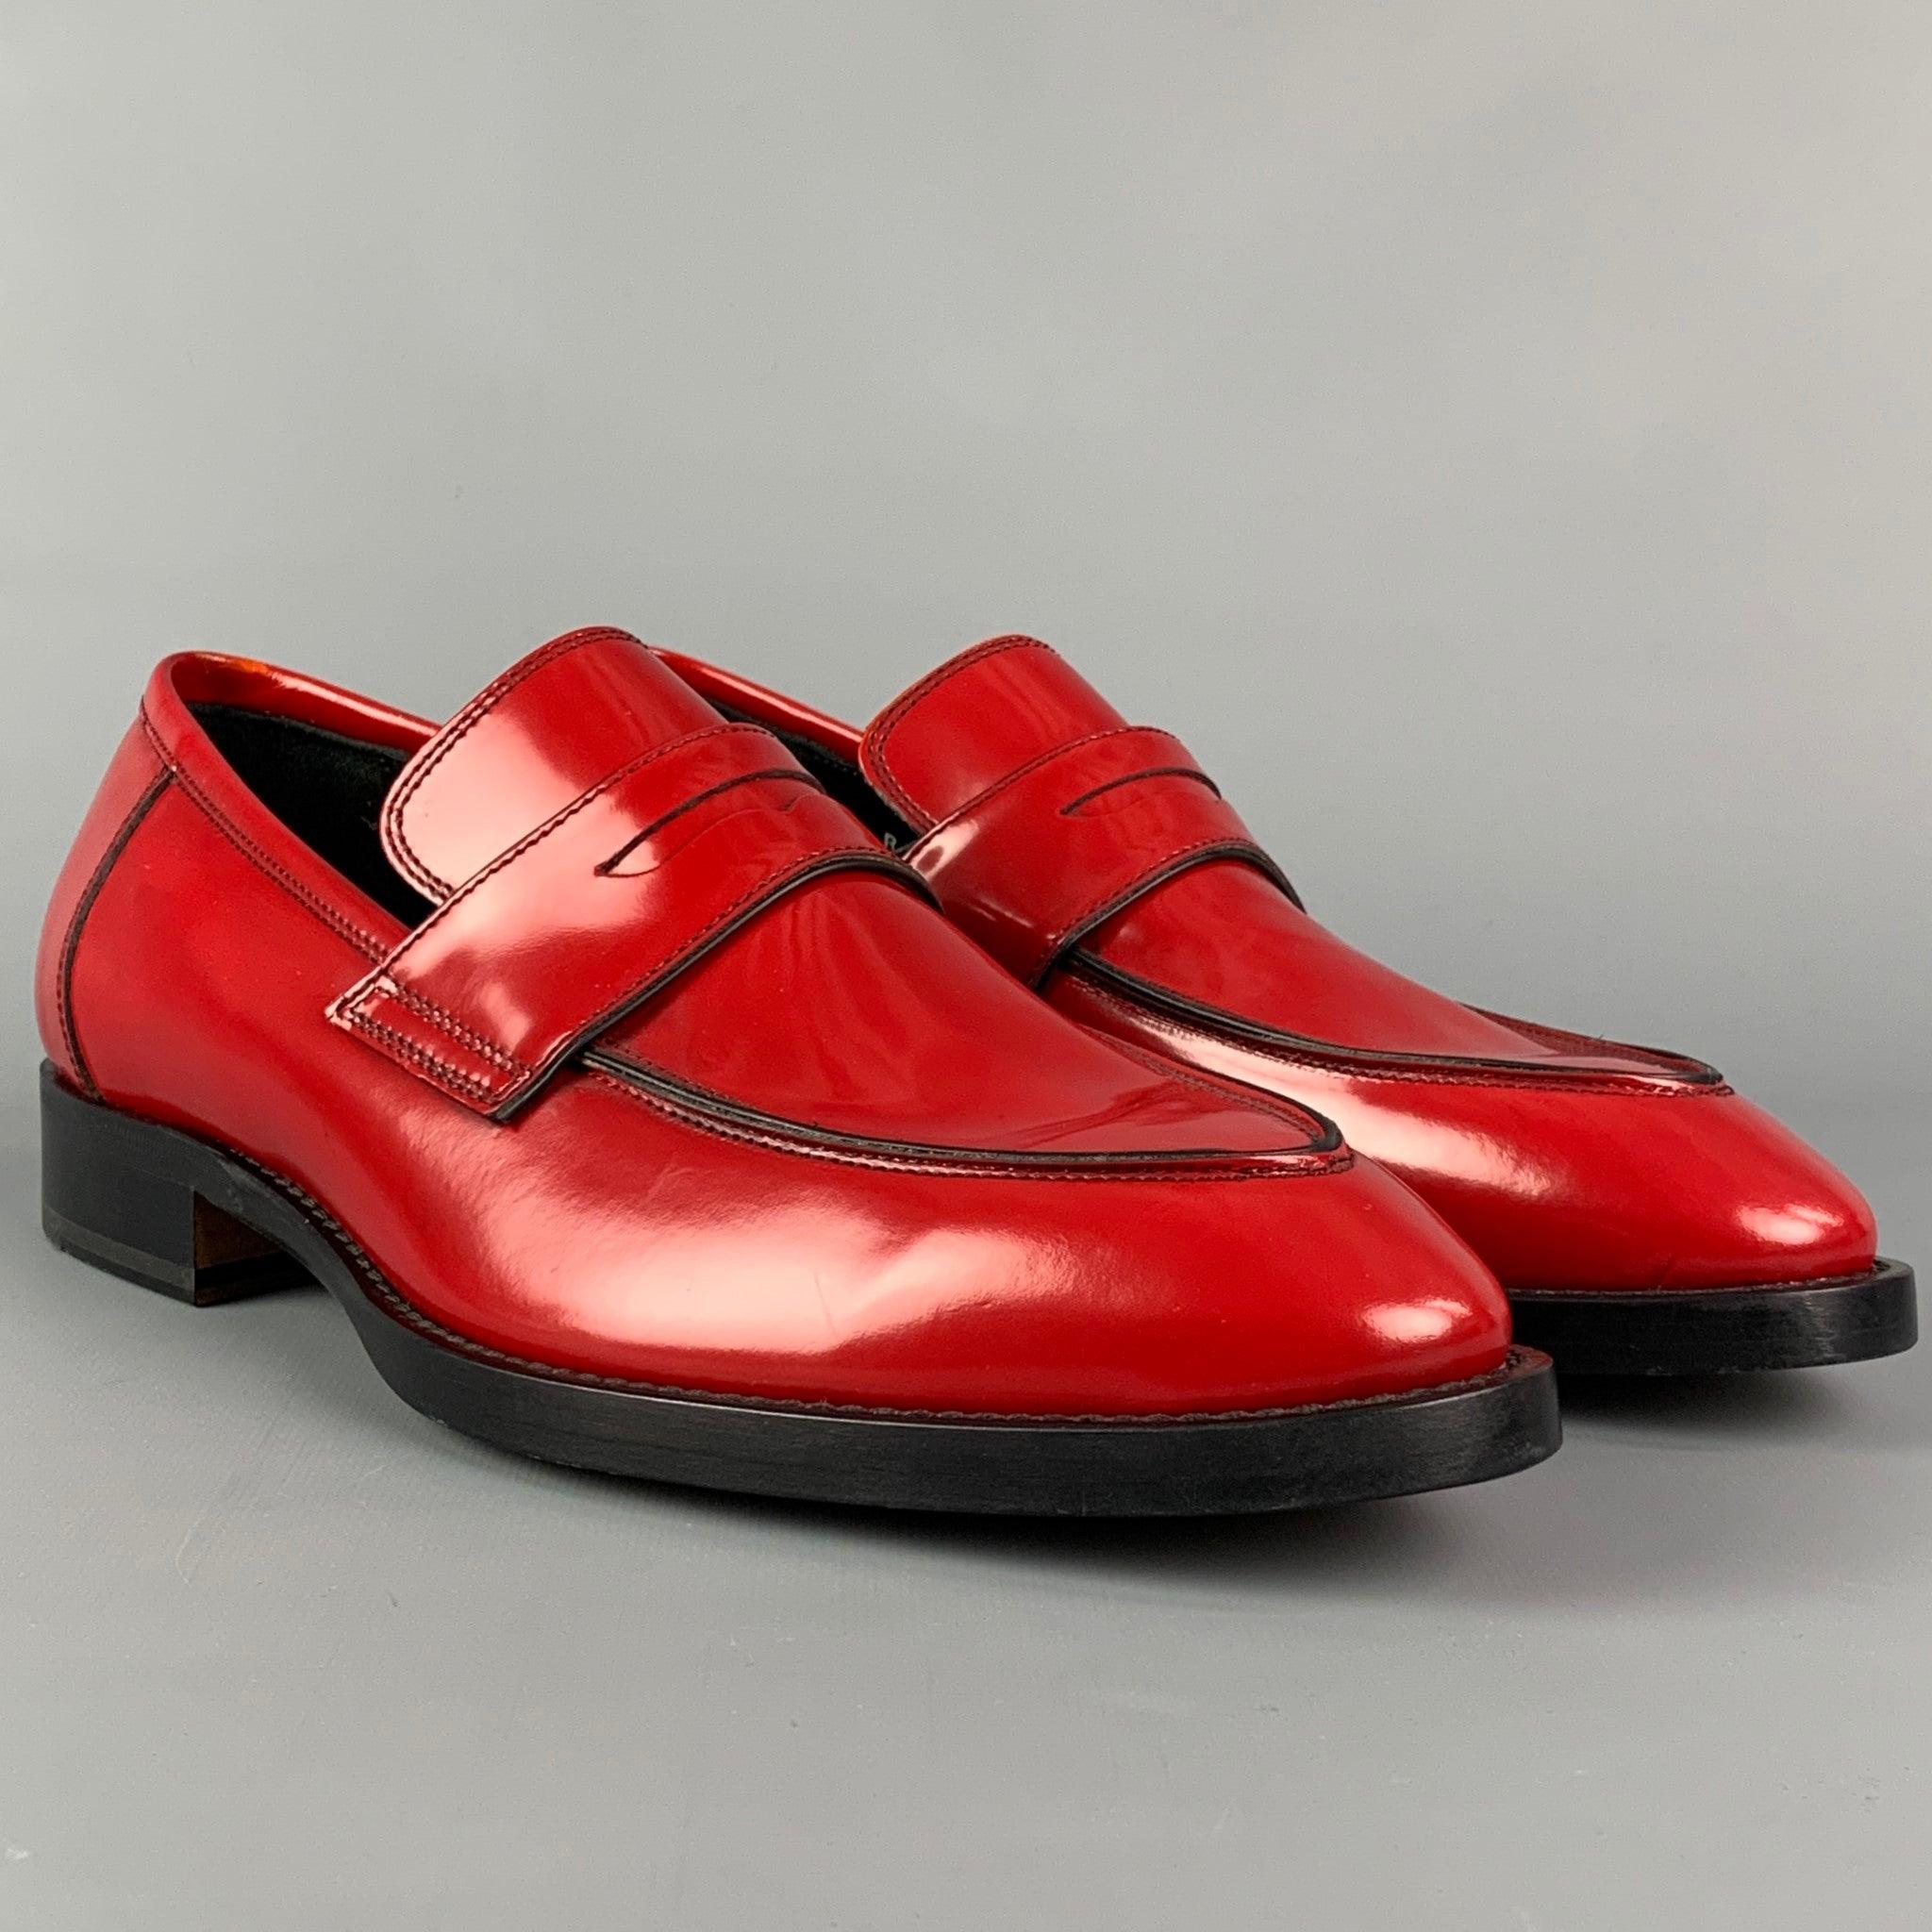 PAUL SMITH loafers comes in a red leather featuring a penny strap, slip on, and a leather sole. Made in Italy. Includes box.
Very Good
Pre-Owned Condition. 

Marked:   R1D05 7 41Outsole: 11.75 inches  x 4.25 inches 
  
  
 
Reference: